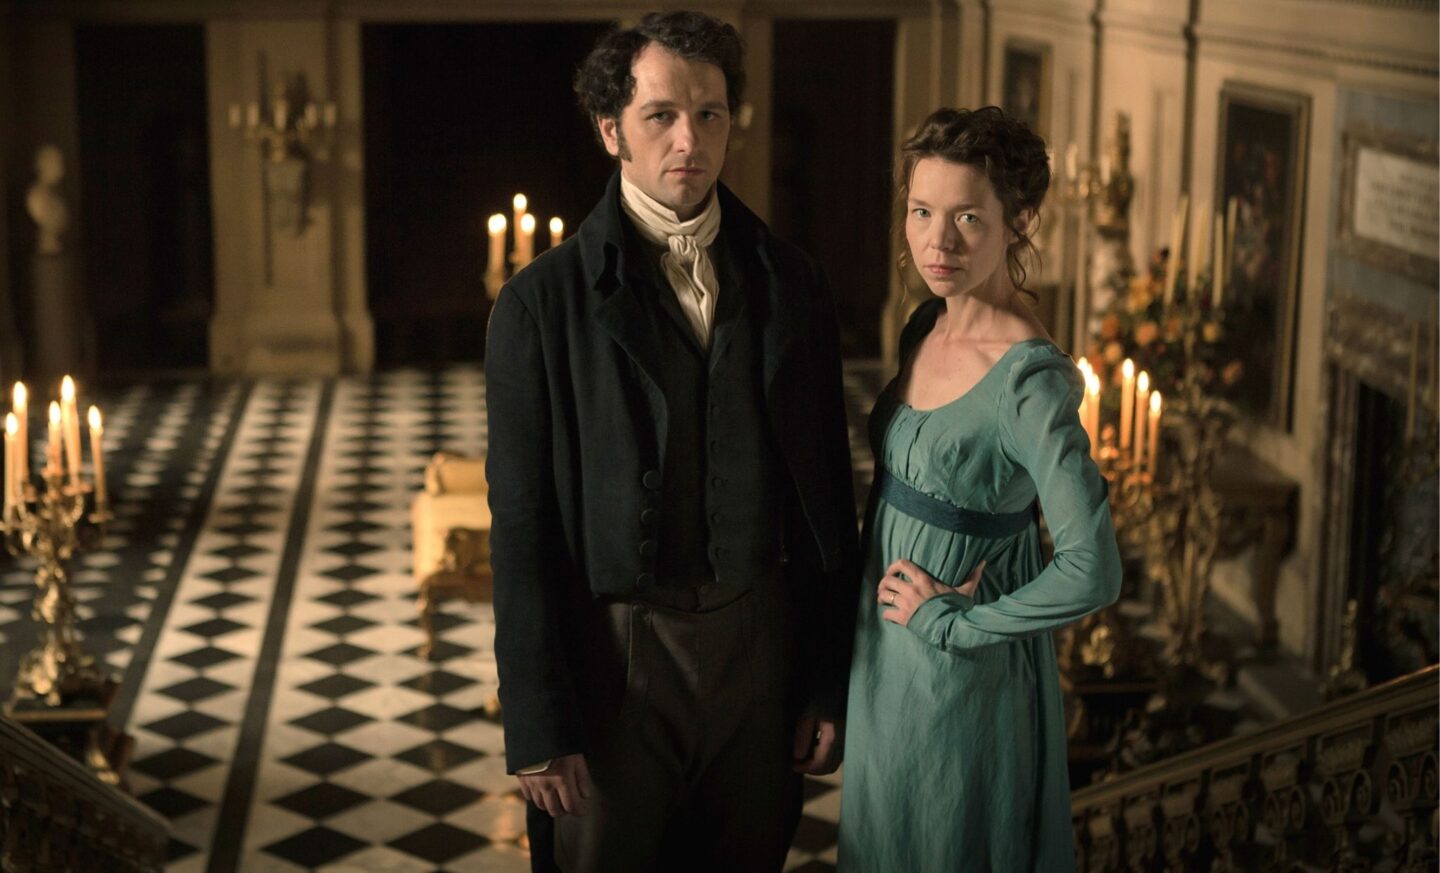 Pride and PRejudice adaptations Death Comes to Pemberley - Just like Gilmore Girls